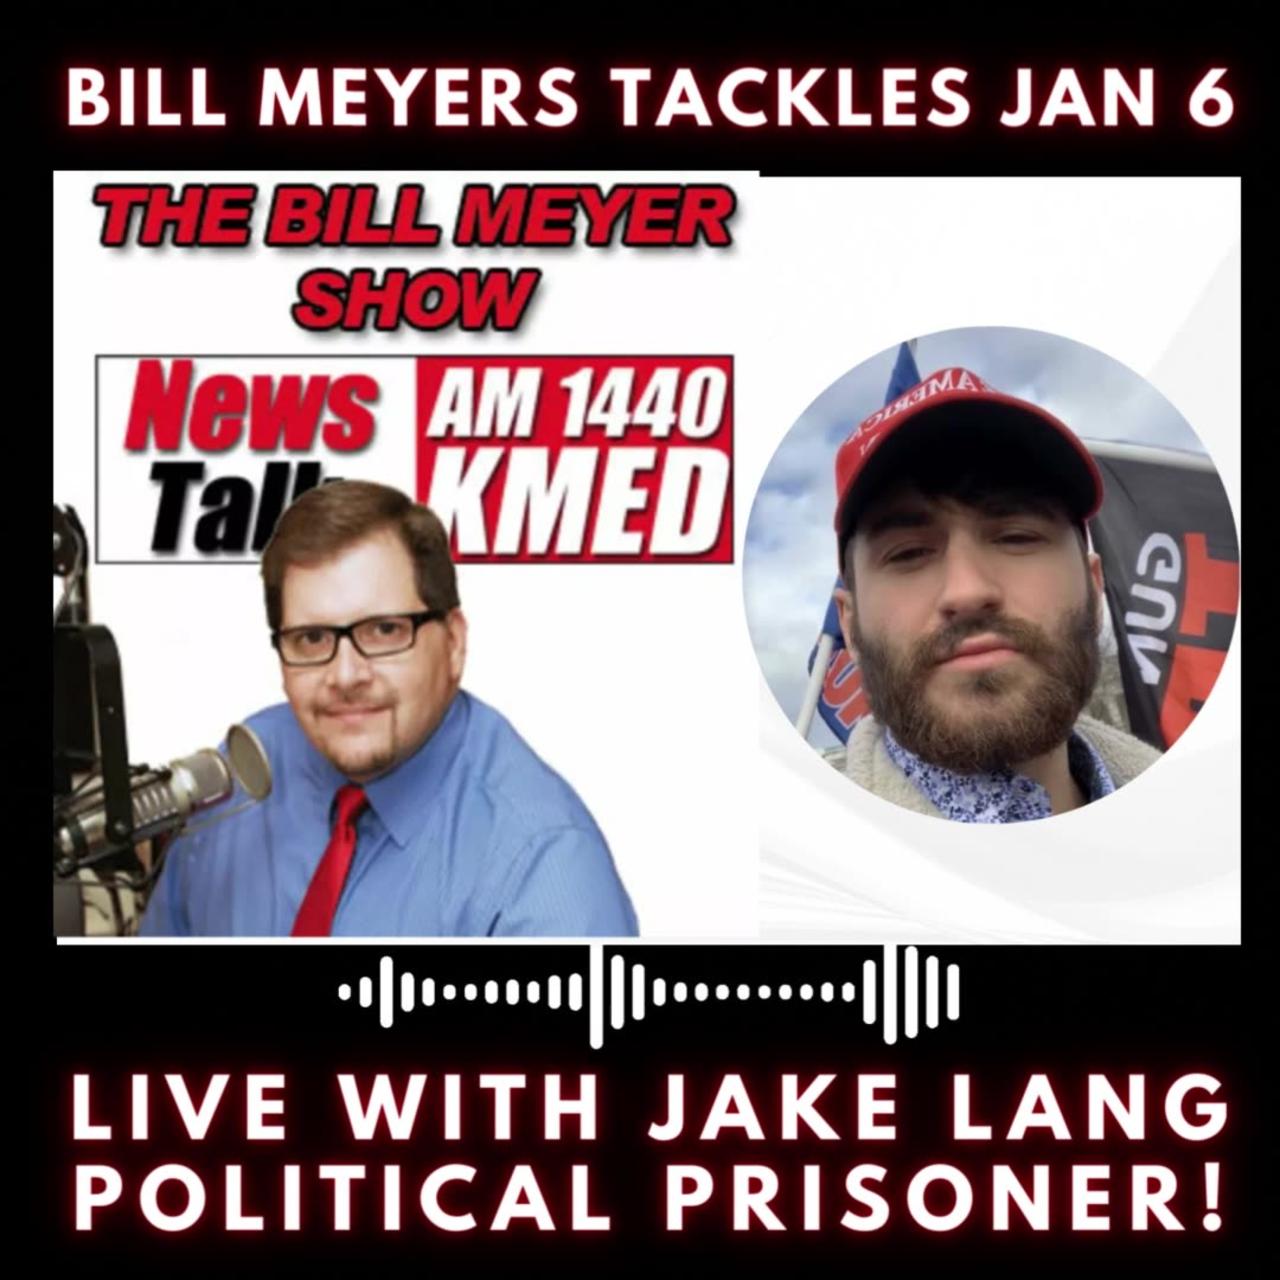 Bill Meyers talks with January 6 Political Prisoner Jake Lang for over 1000 days without a trial!